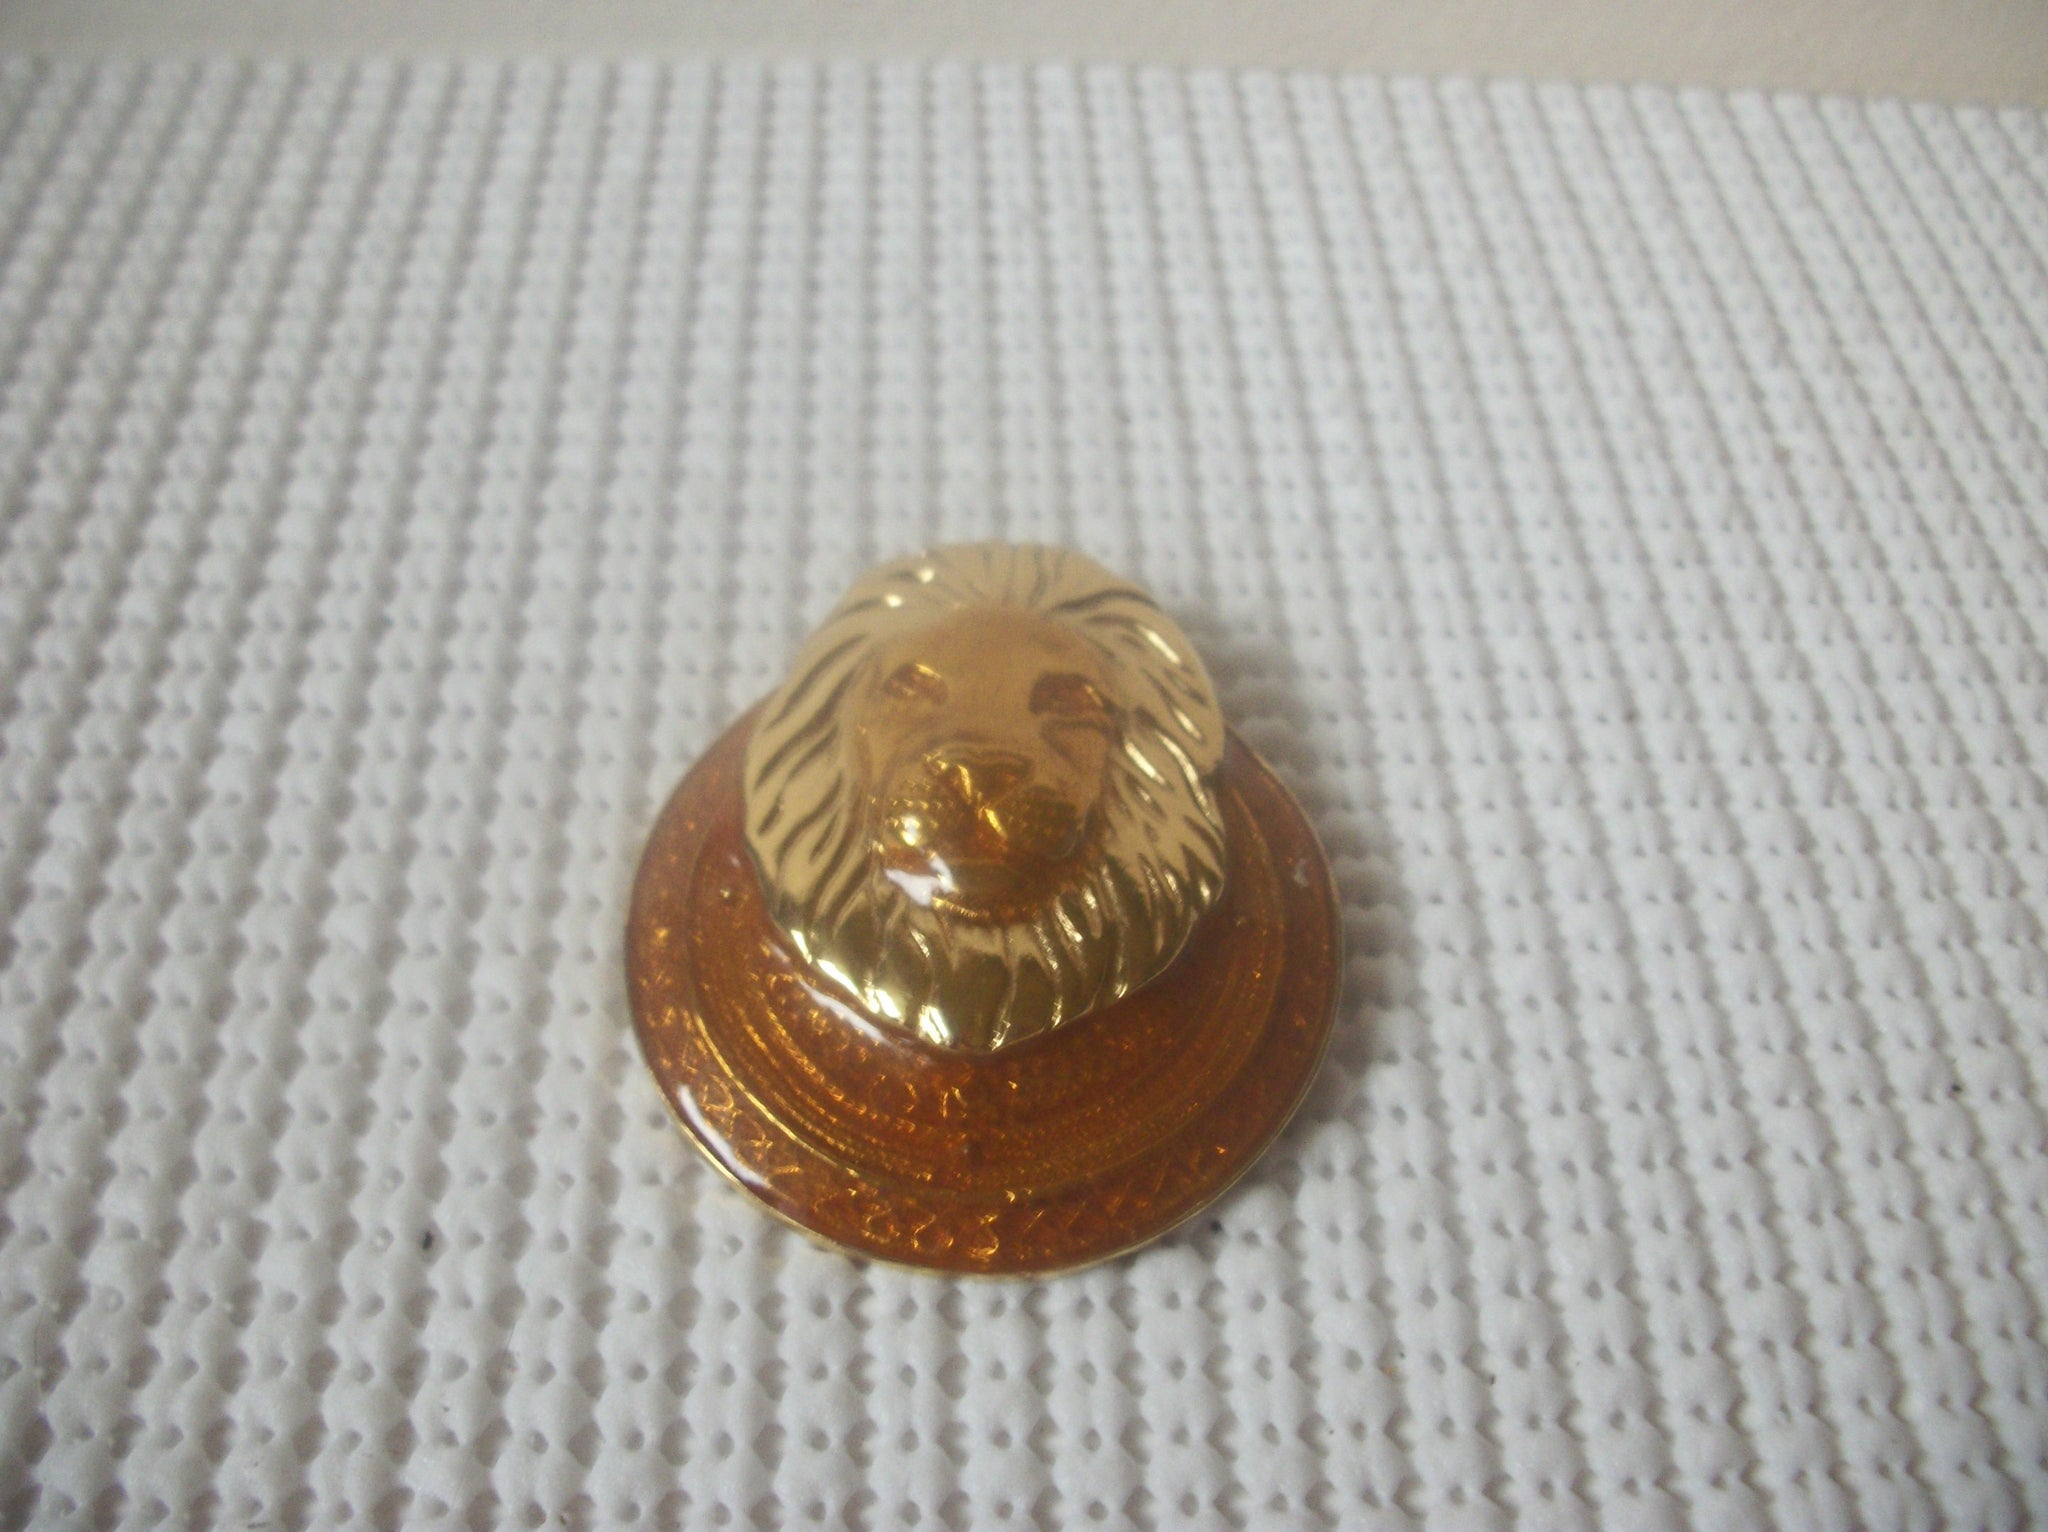 1950s I Am The King, BRASS Lion Head Large Metal Surreal Pin Pendant Enhancer 62018